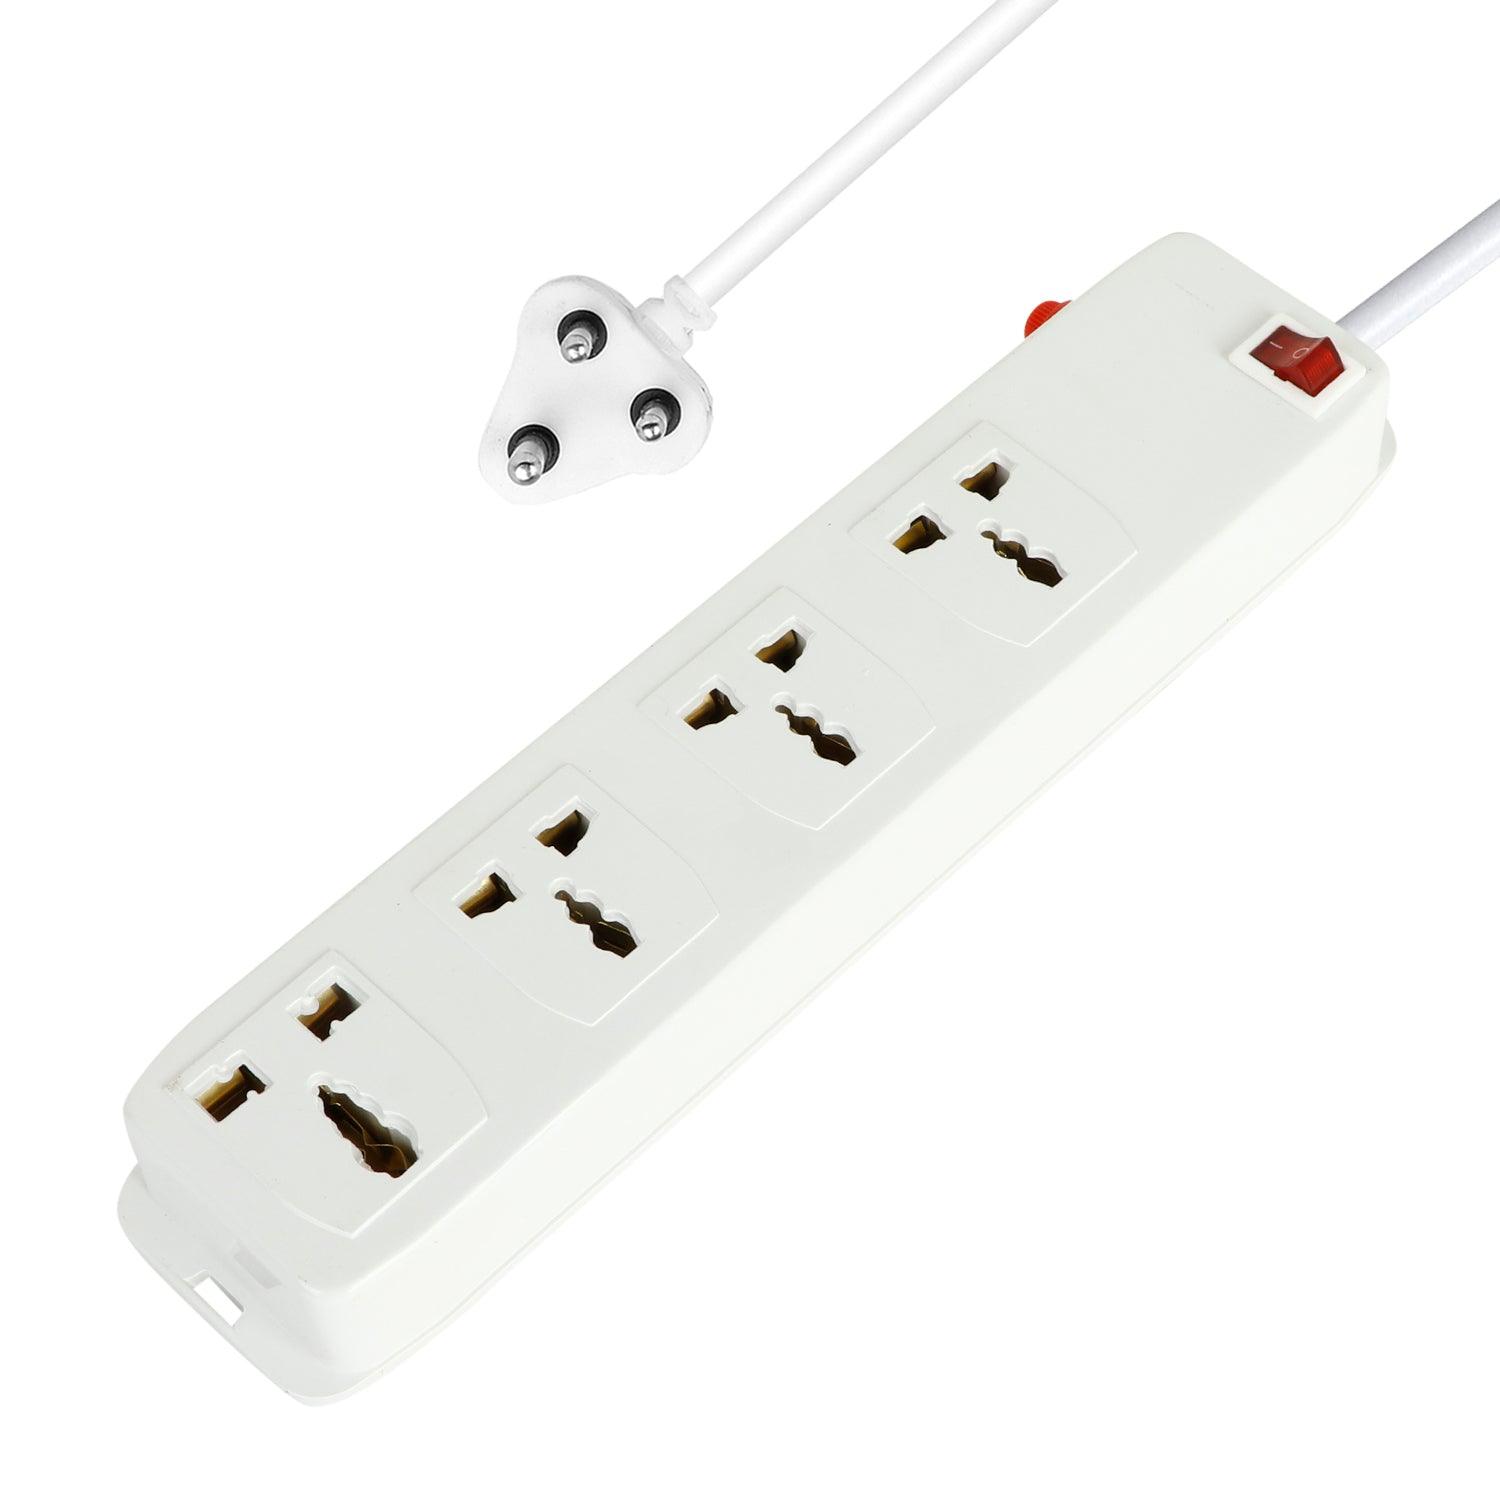 FEDUS Surge Protectors Spike Buster Extension Boards with Switch and Long Wire for Computer (4M/13F) - FEDUS